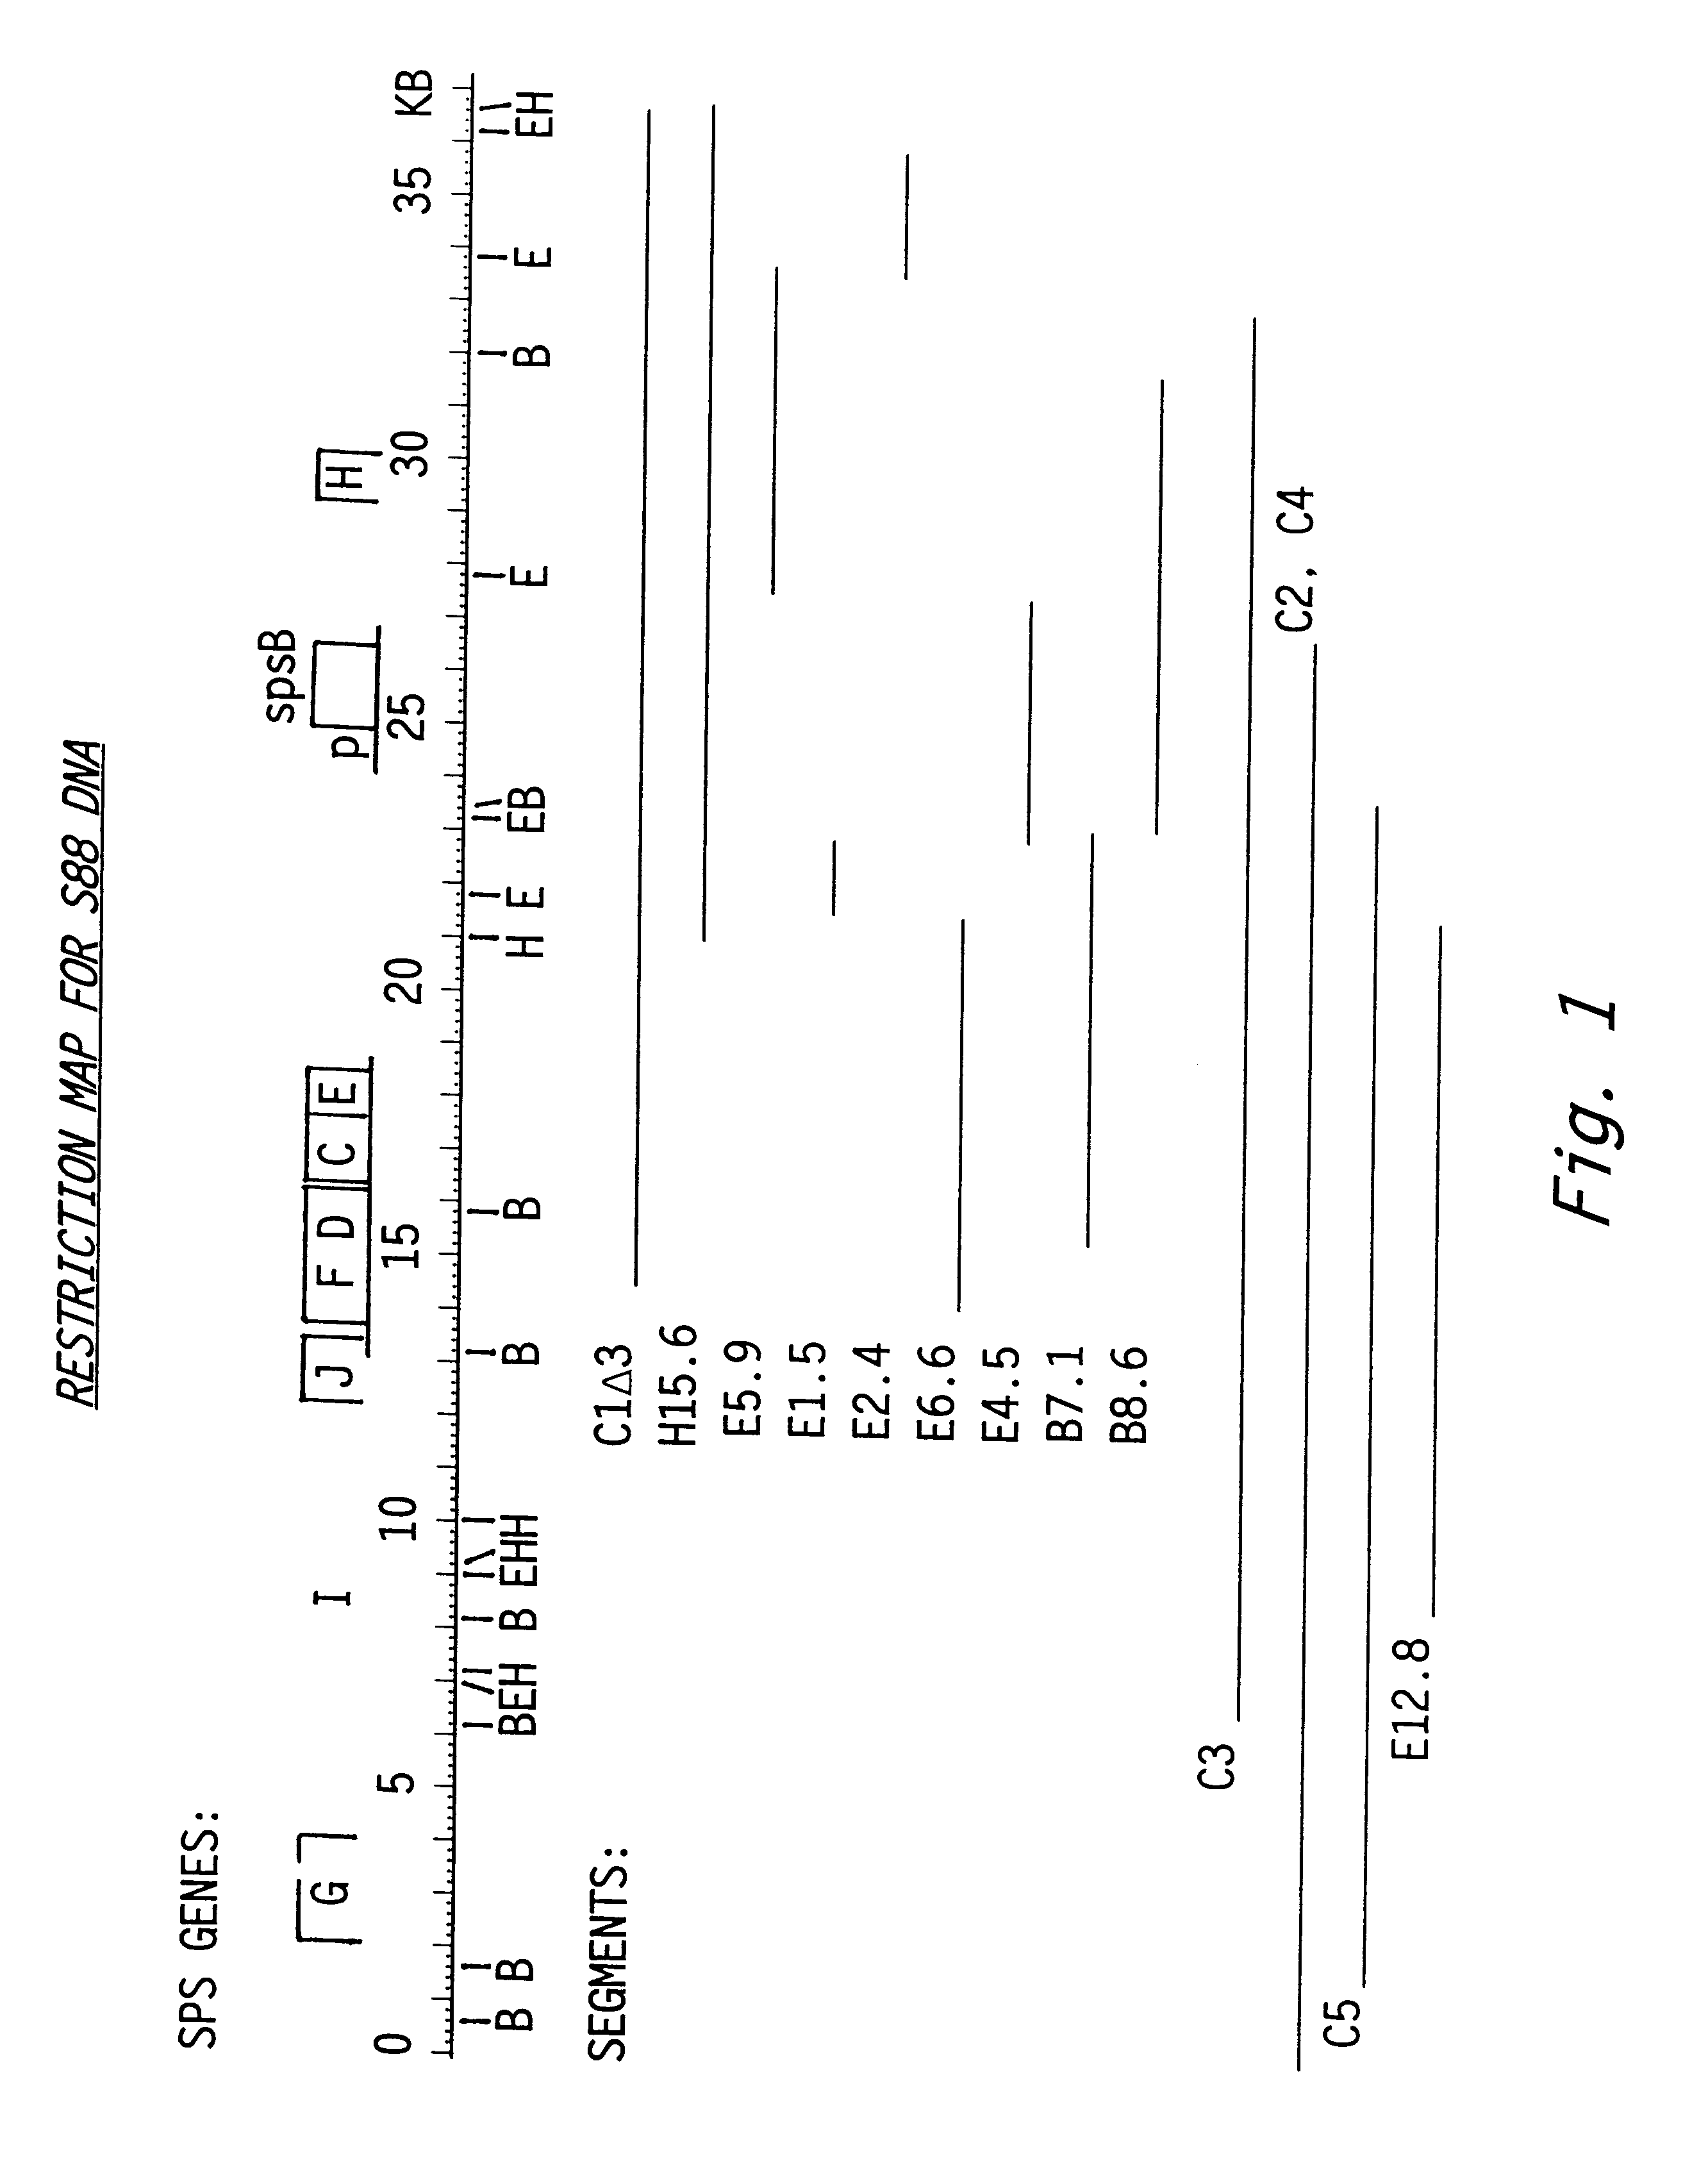 DNA segments and methods for increasing polysaccharide production